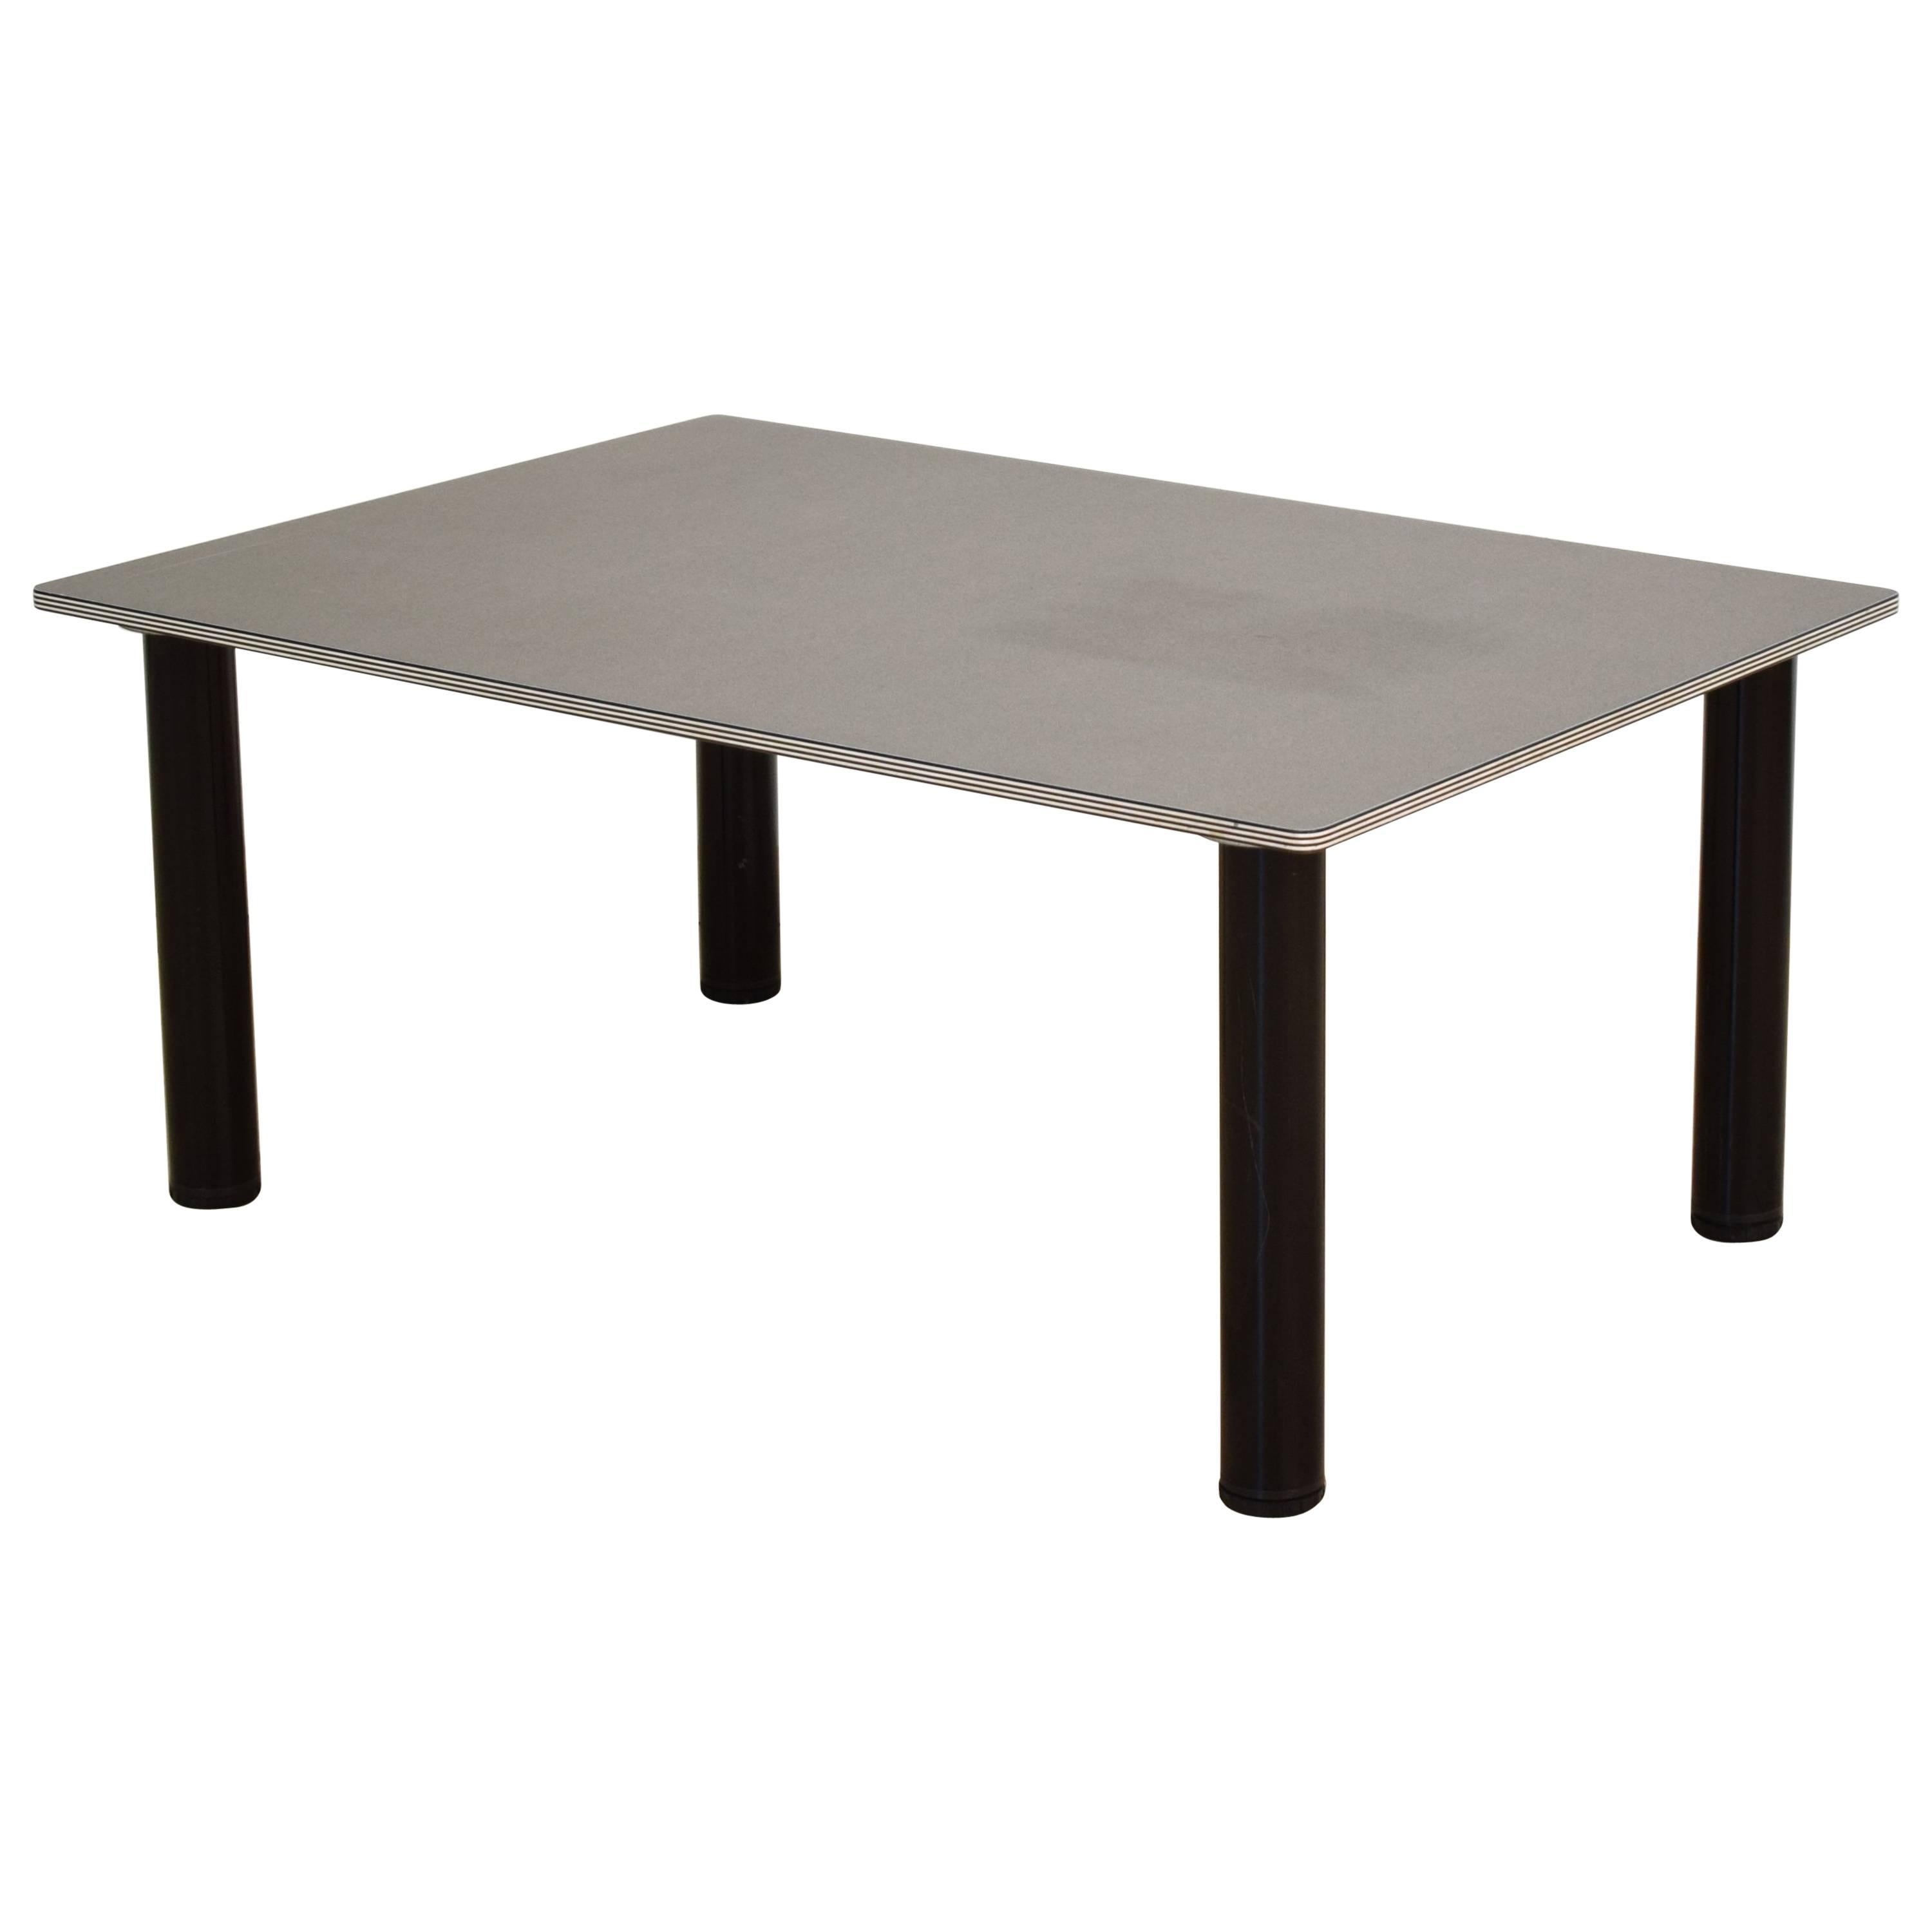 1980s Postmodern Memphis Group Coffee Table in Black and Grey